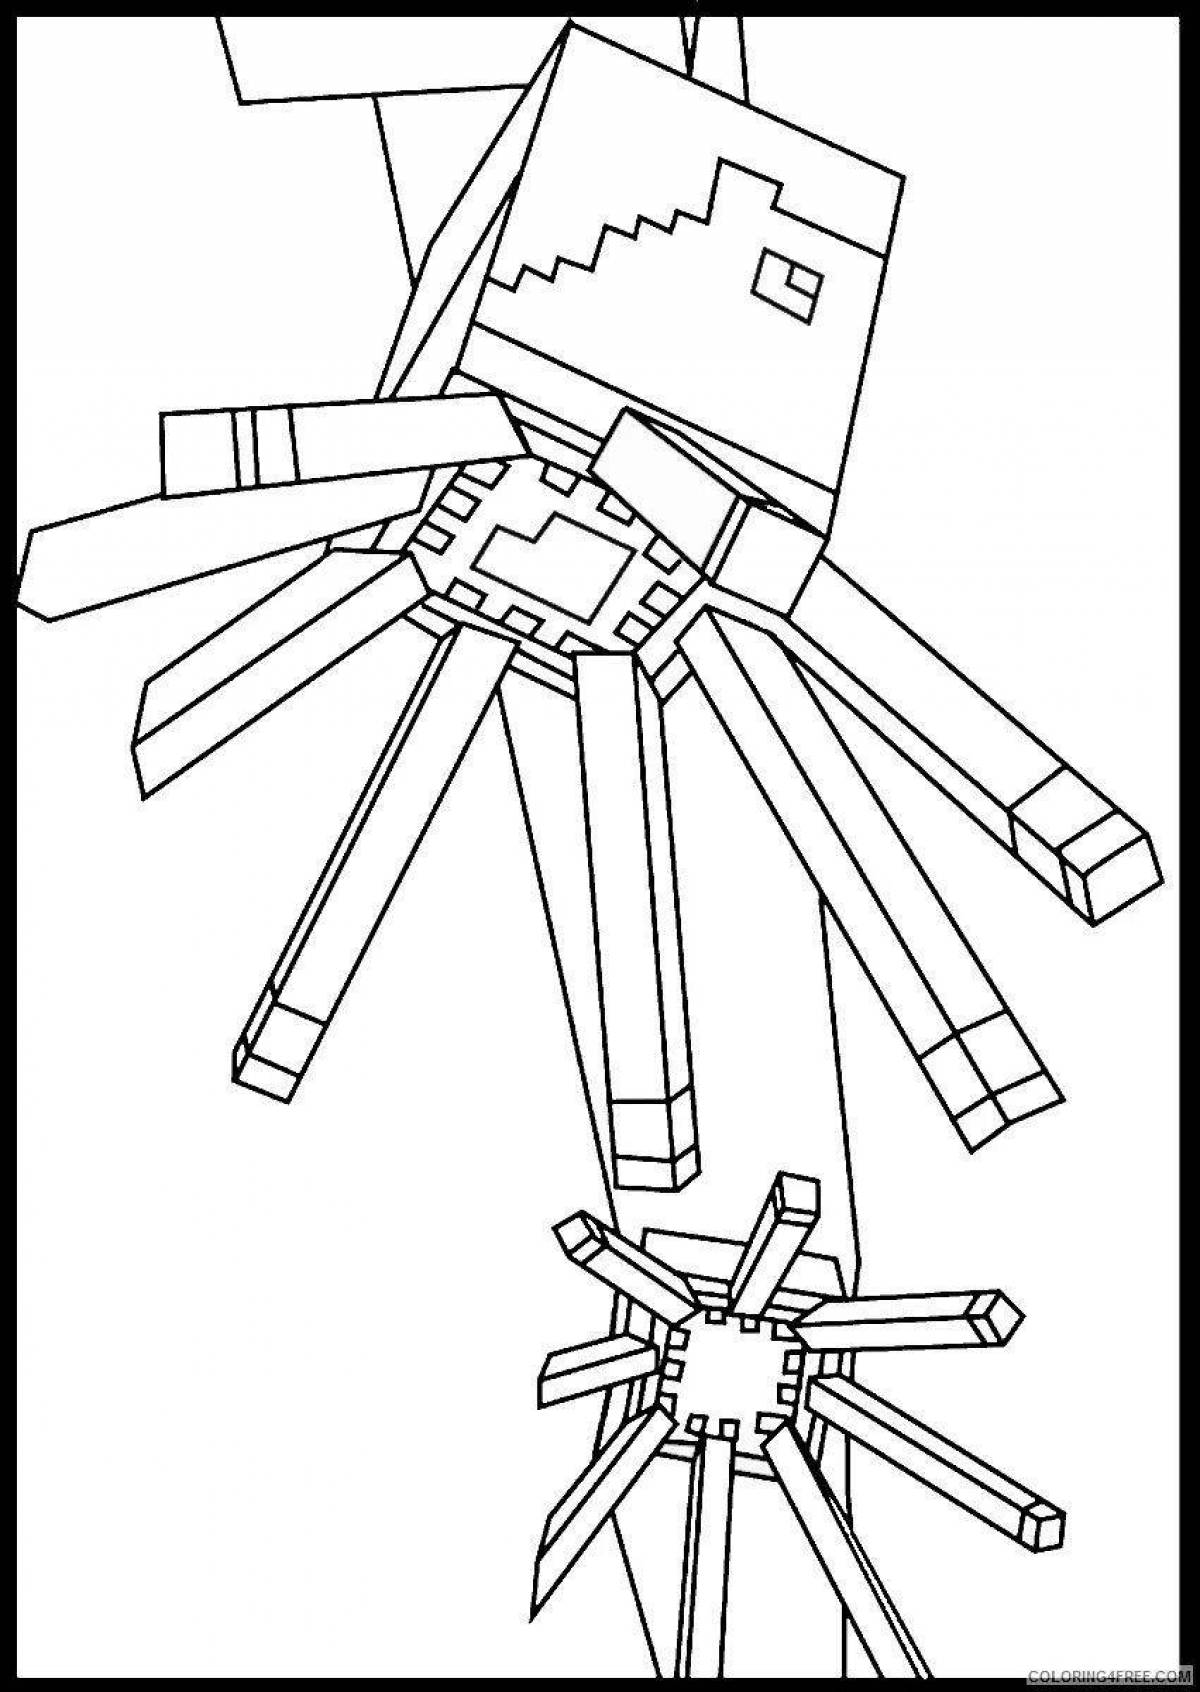 Playful minecraft spider coloring page